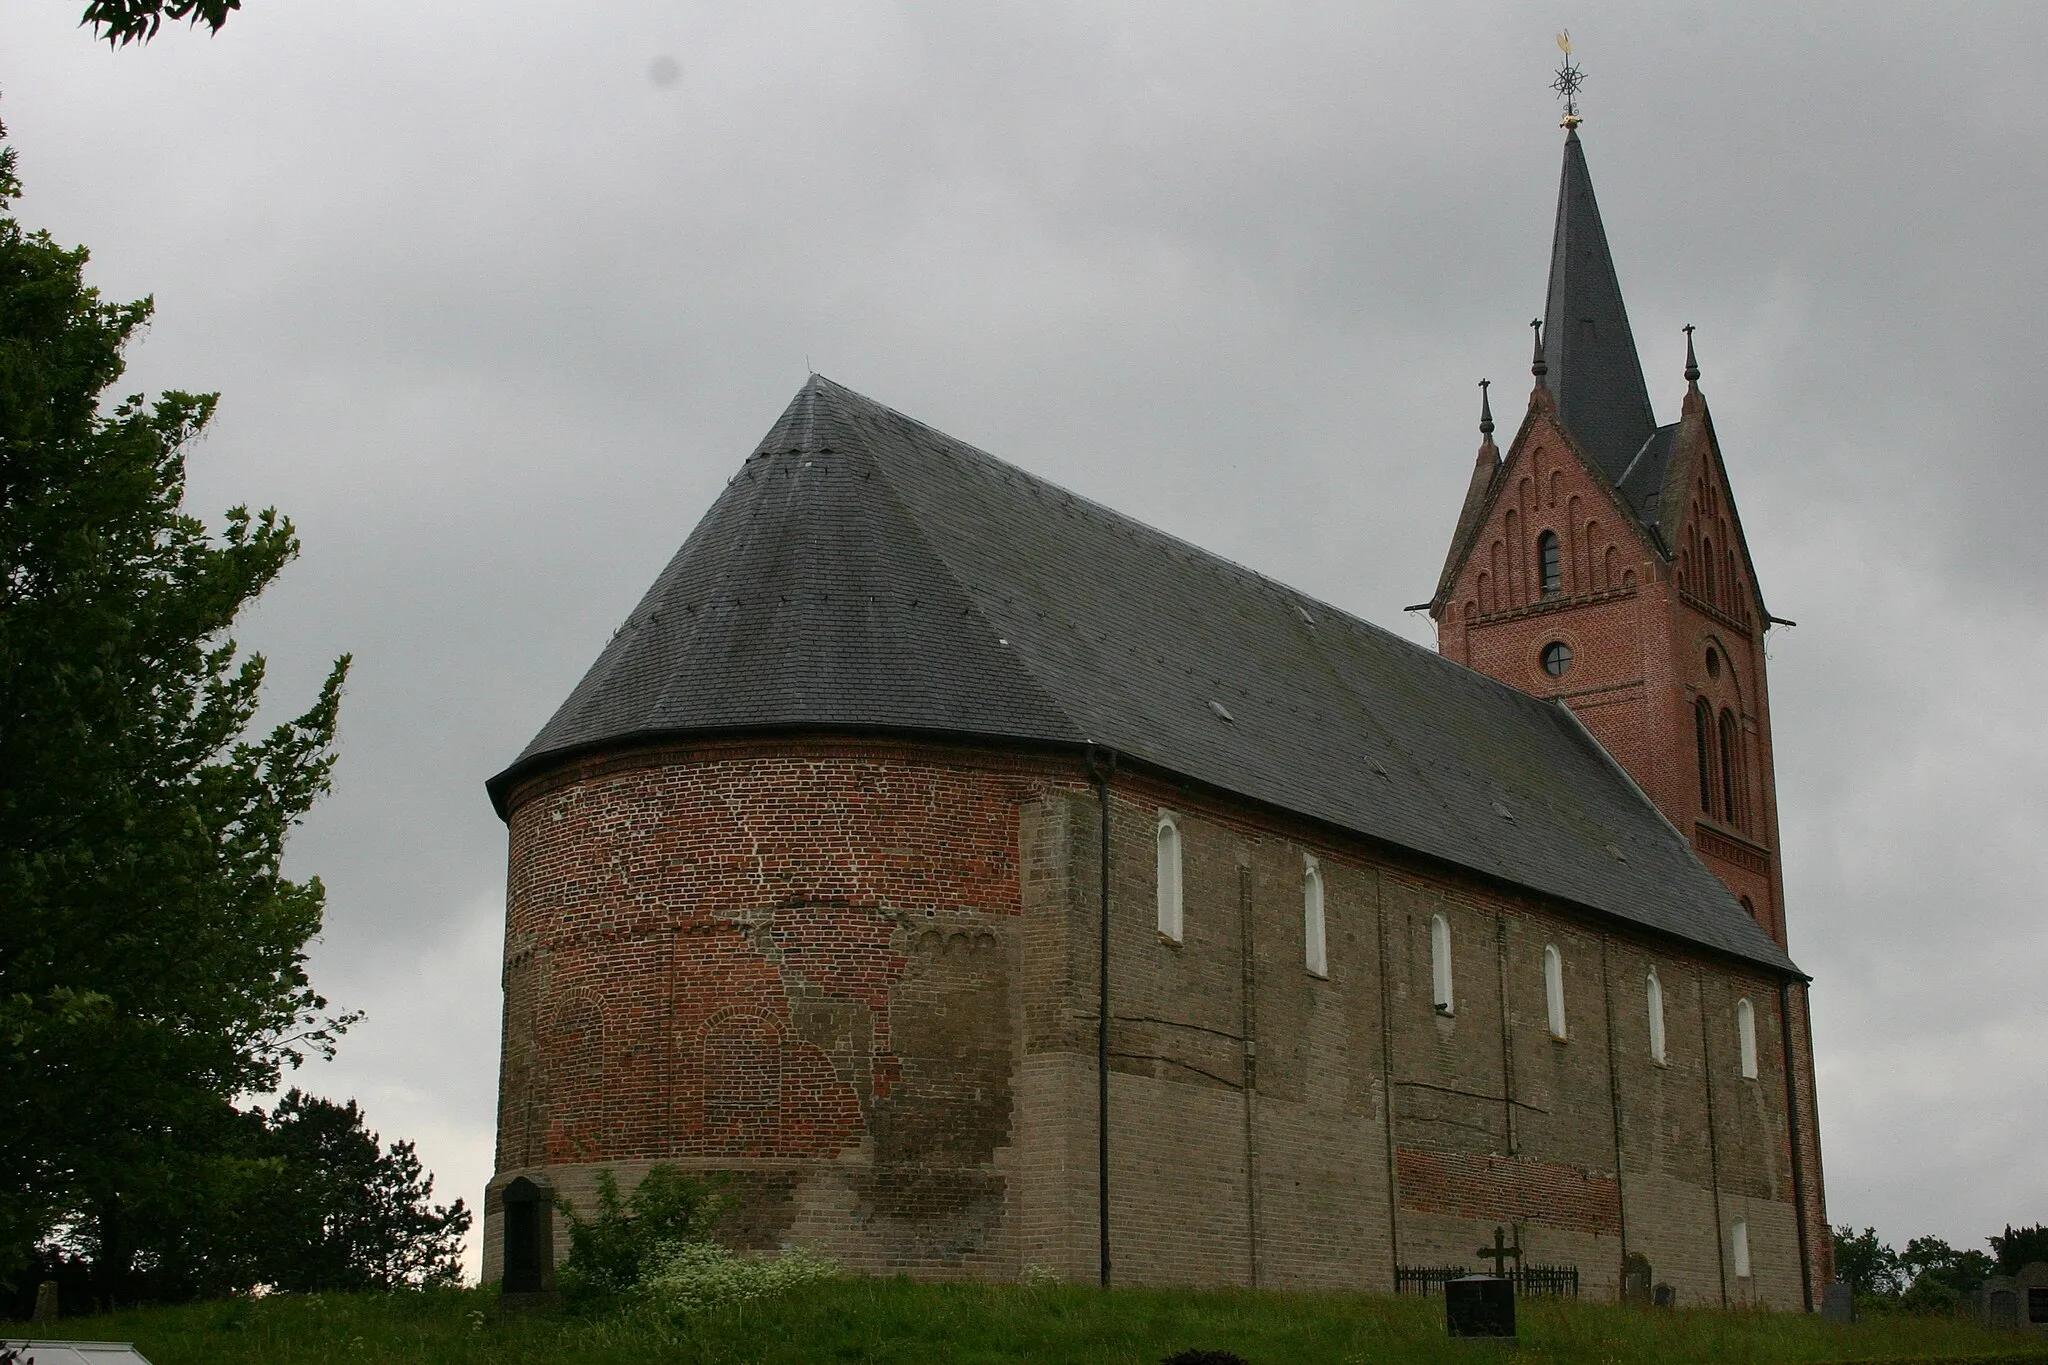 Photo showing: Historic St. Boniface Church in Arle, district of Aurich, East Frisia, Germany